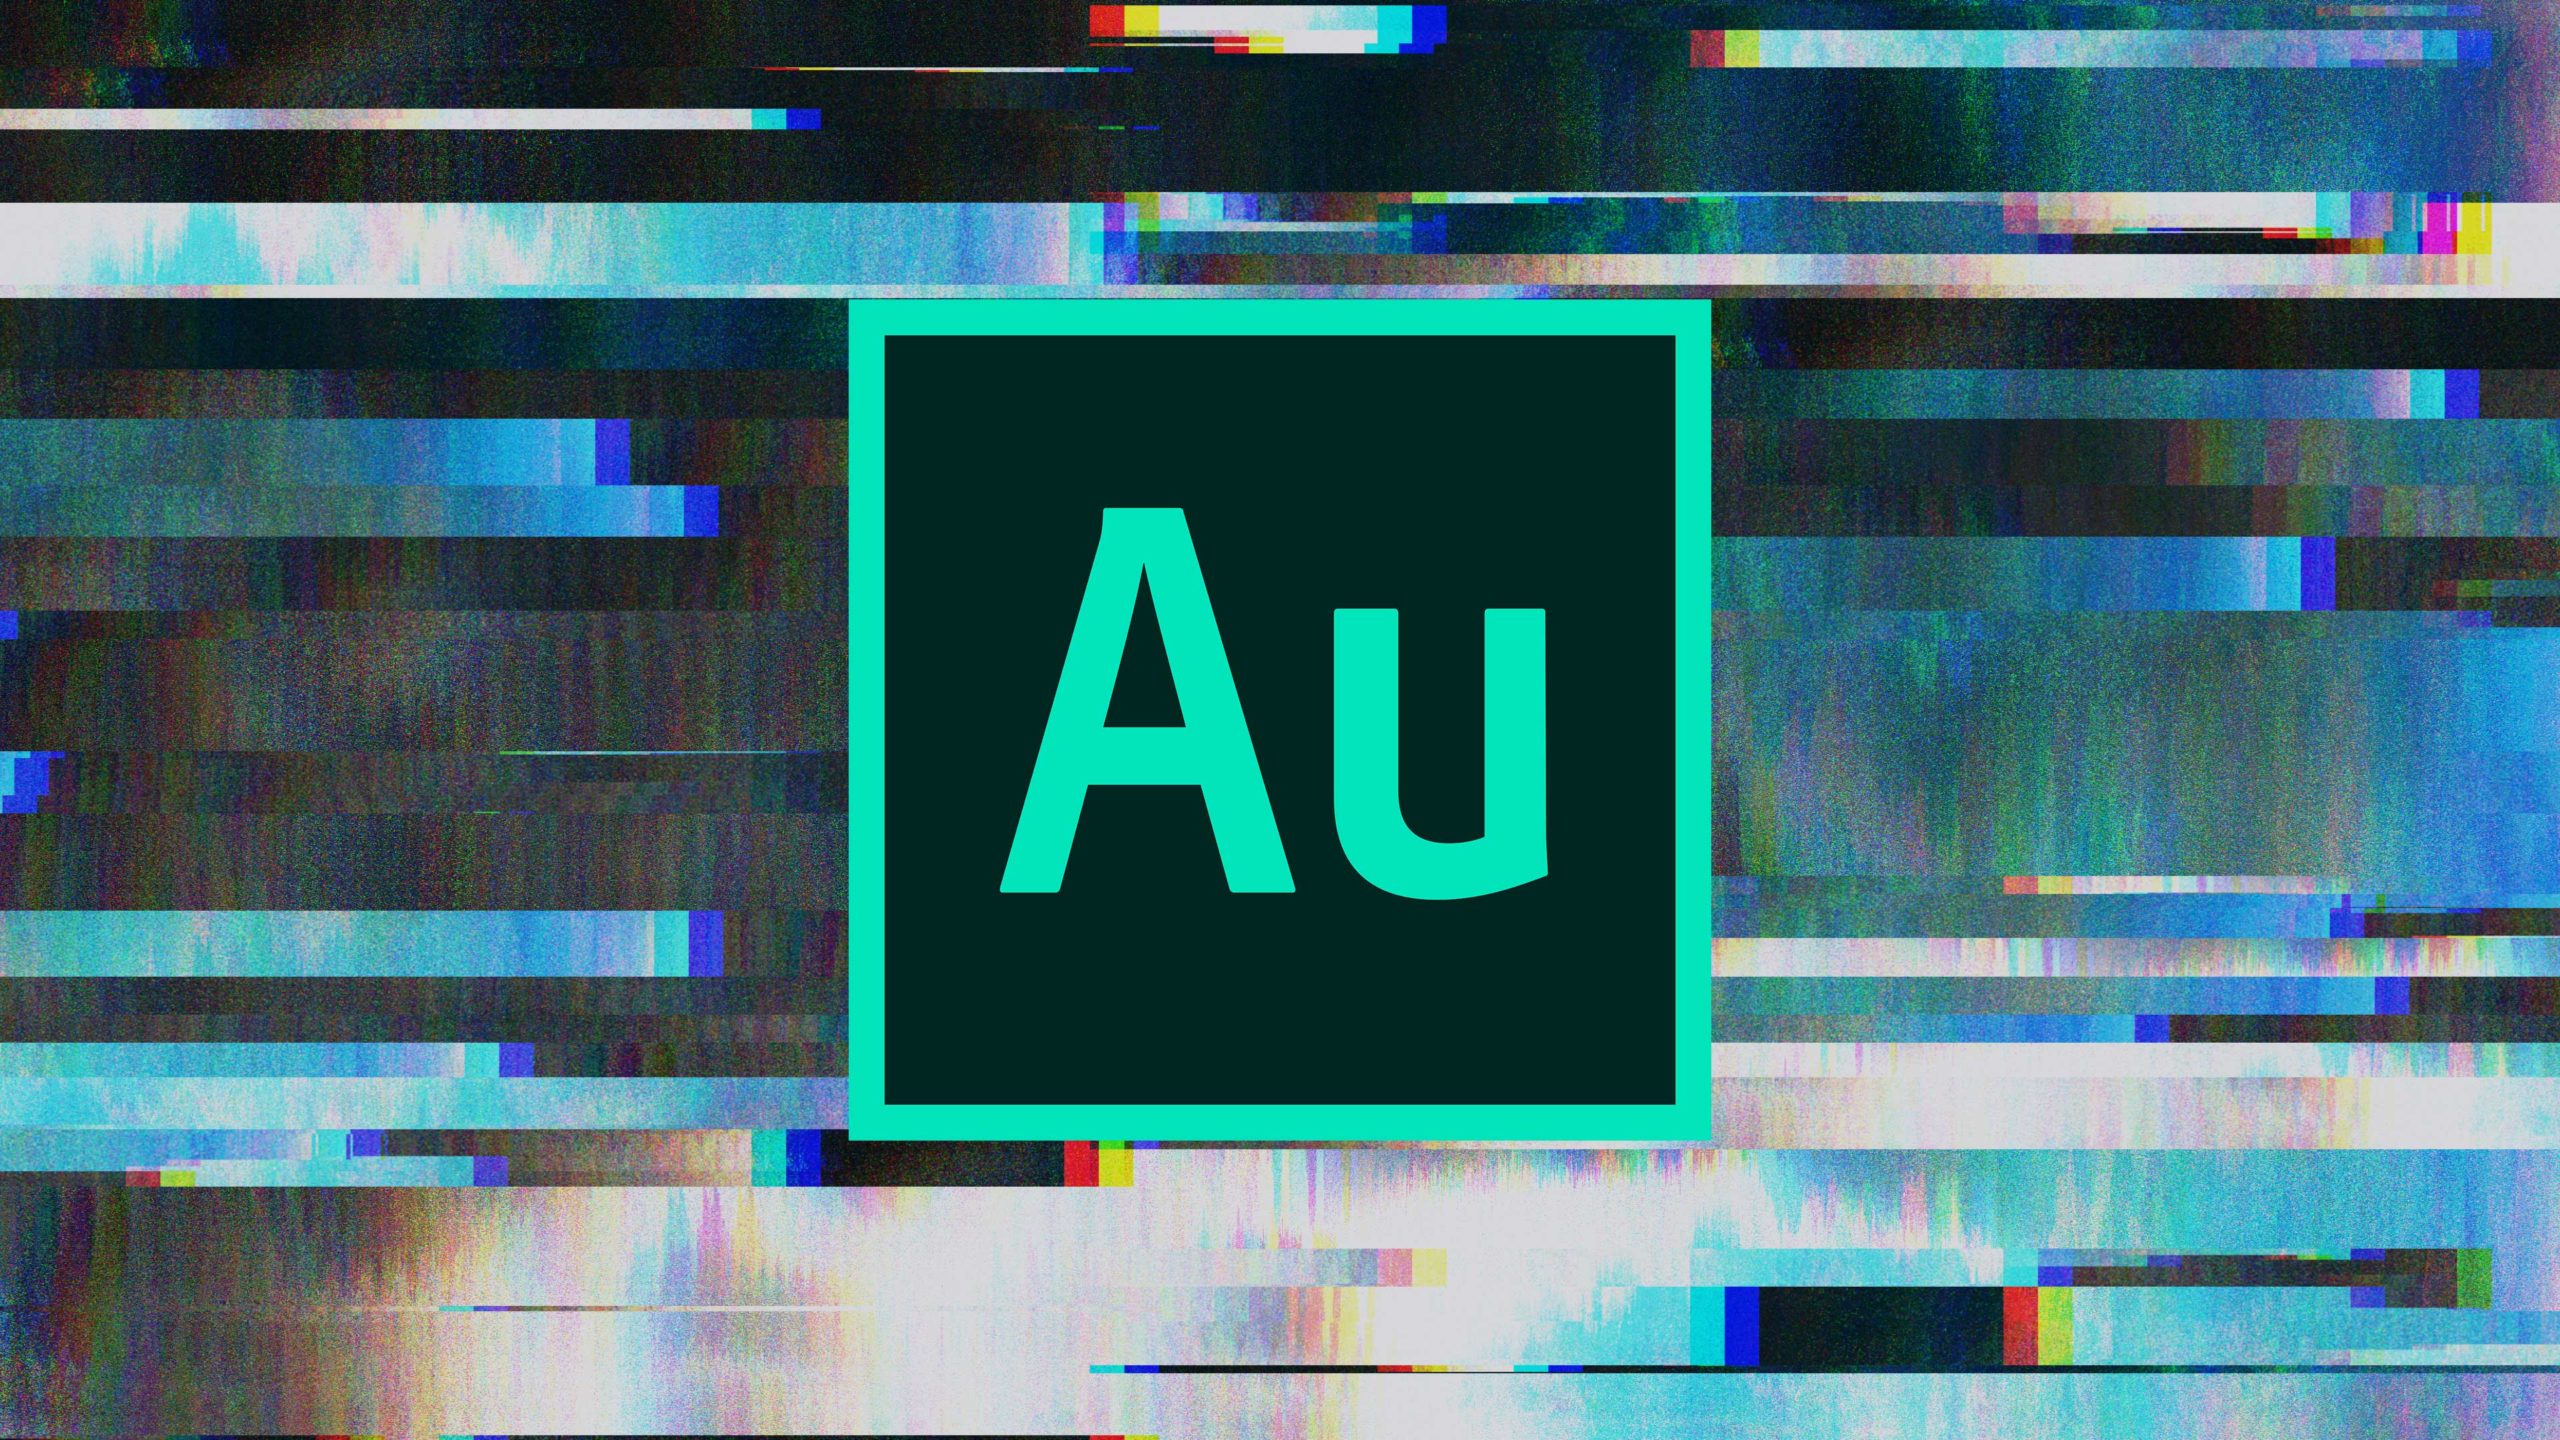 How To Fix Distorted Audio In Adobe Audition (Clipped Audio)